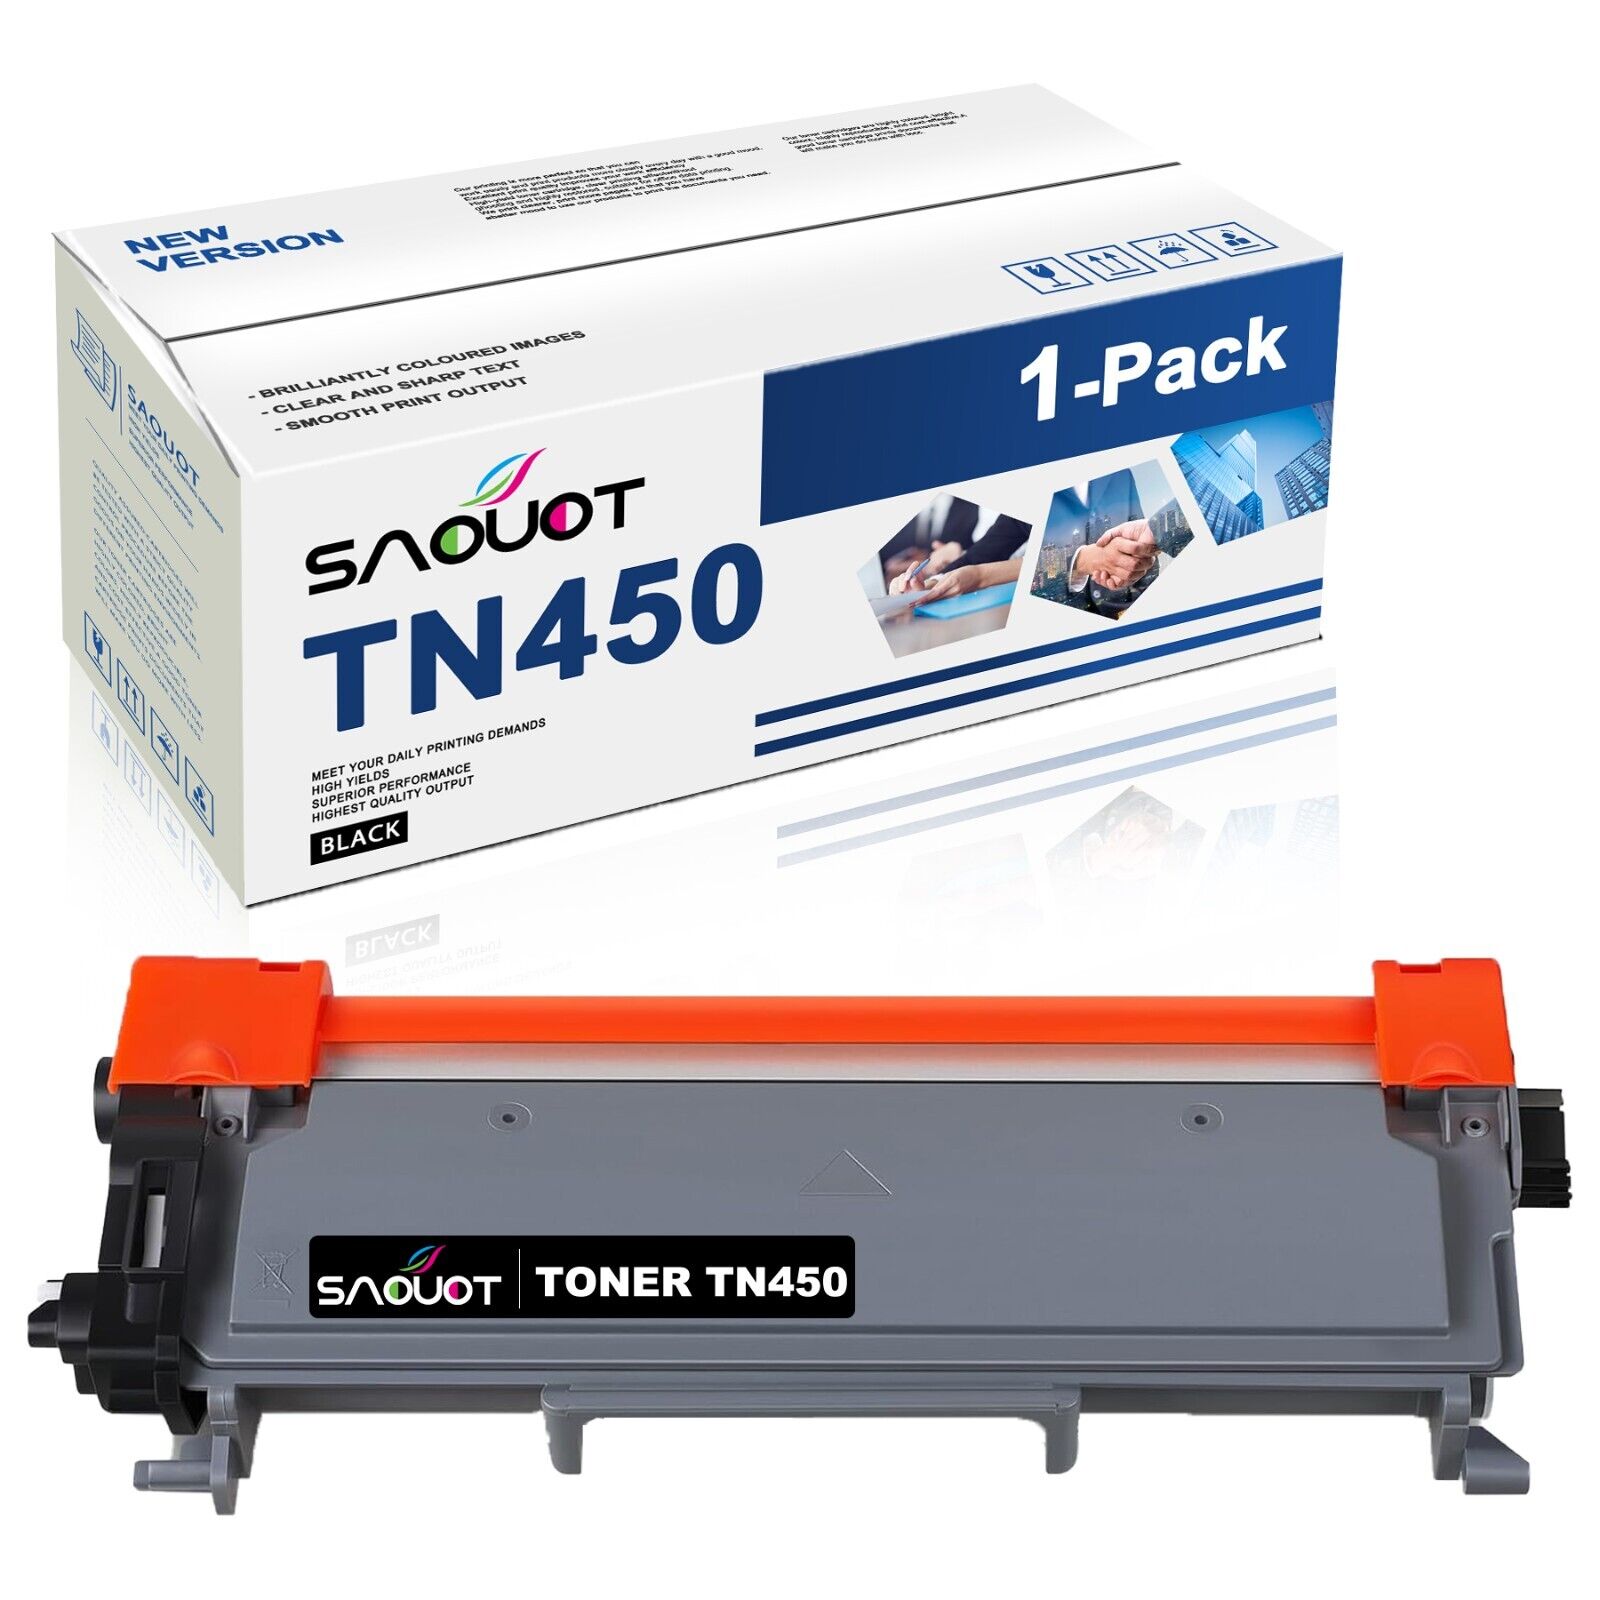 TN450 TN-450 Toner Cartridge Replacement for Brother Black HL-2280DW MFC-7240